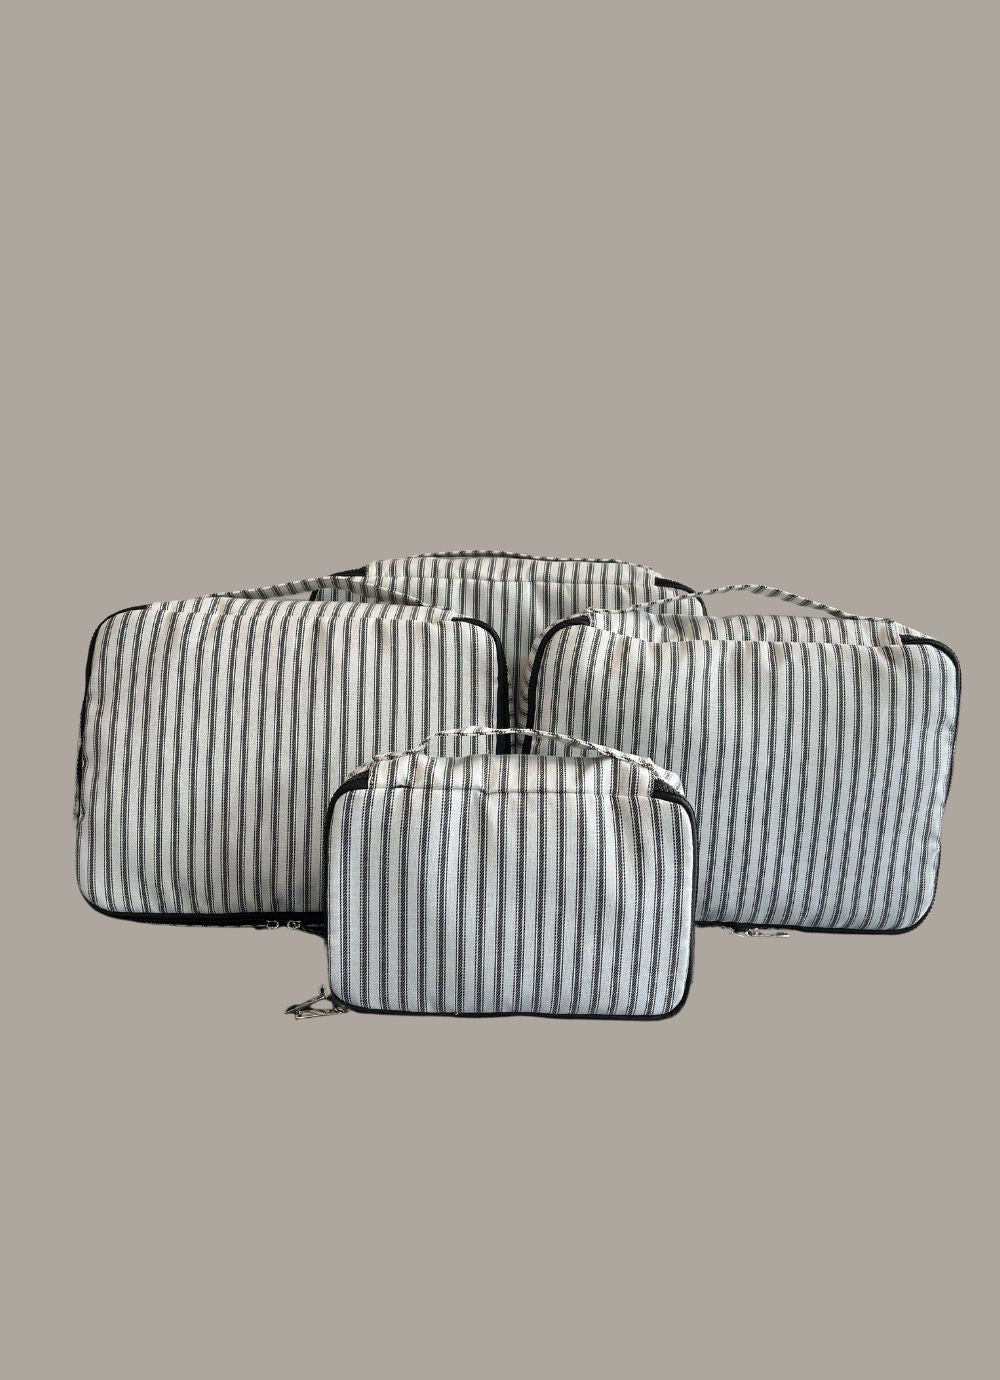 Stripey Packing Cube (Set of 4)